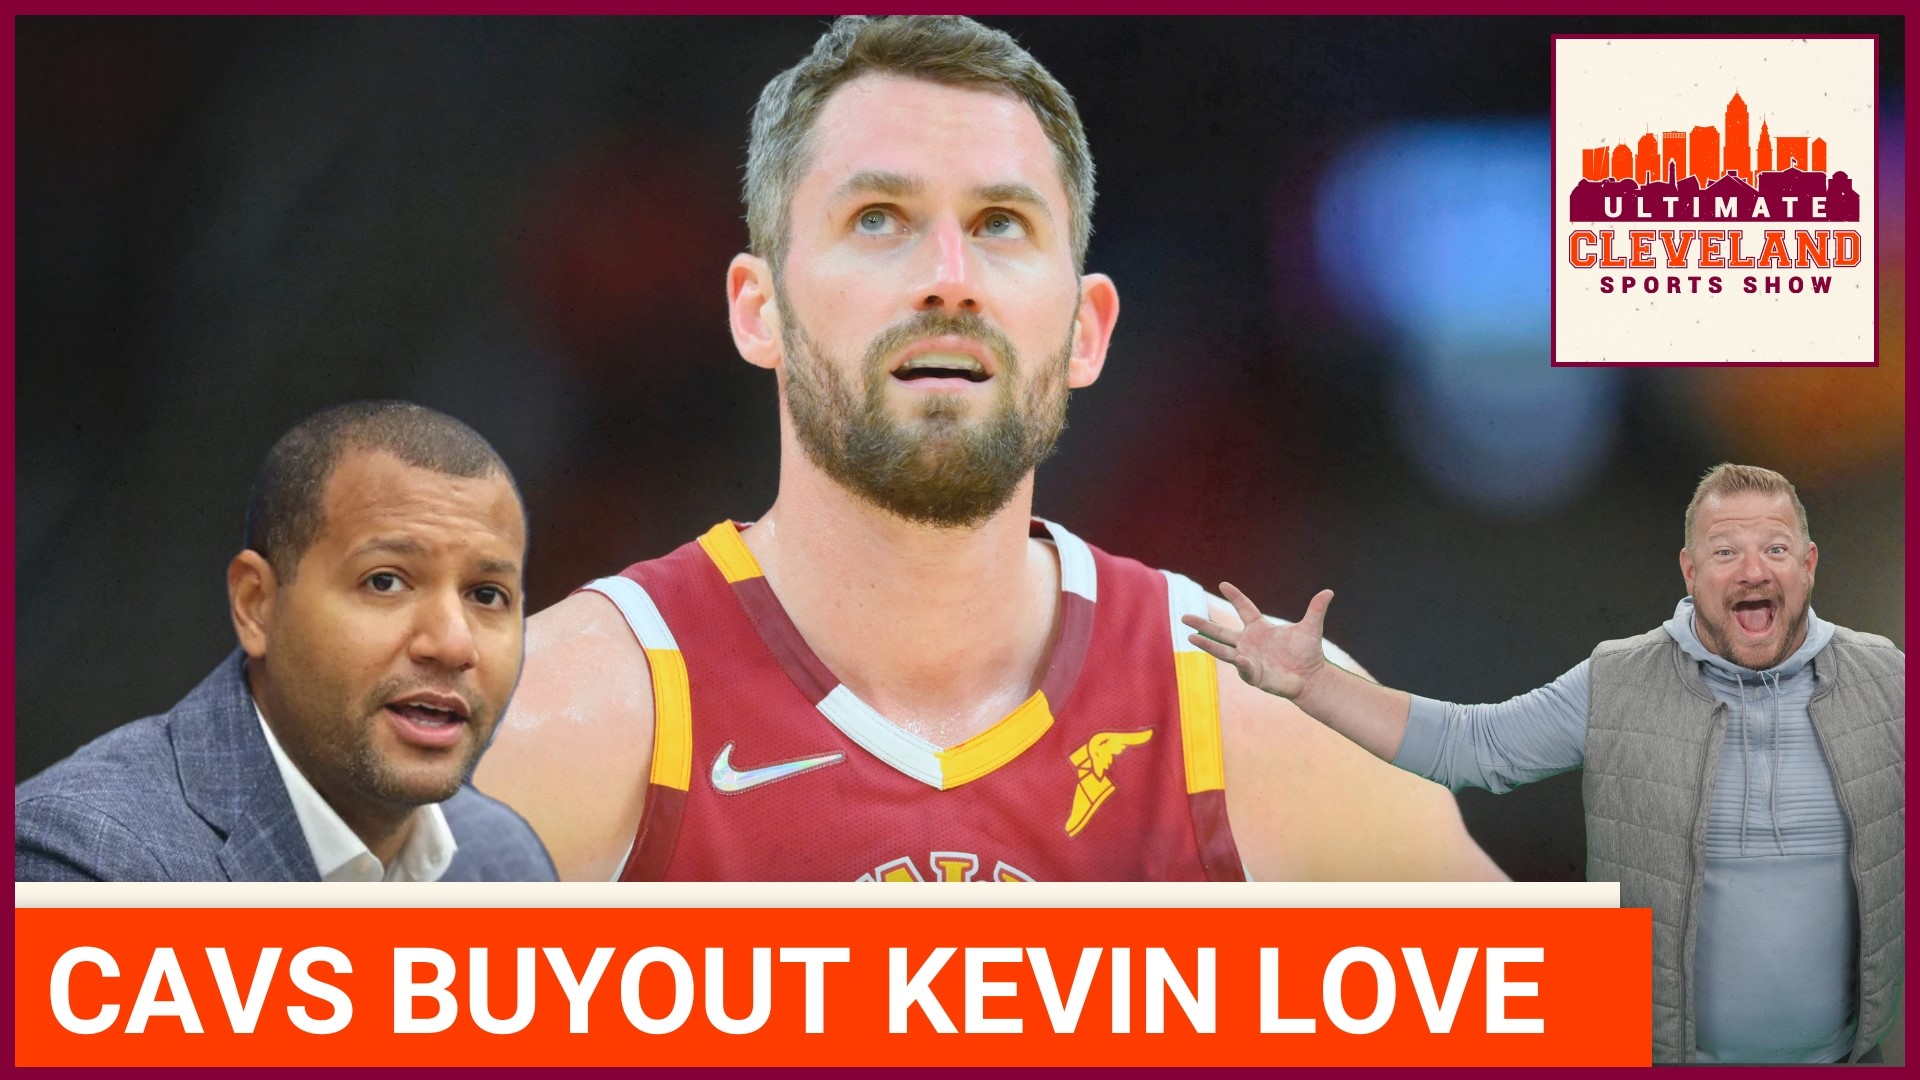 After nine seasons Kevin Love and the Cleveland Cavaliers are close to parting ways.